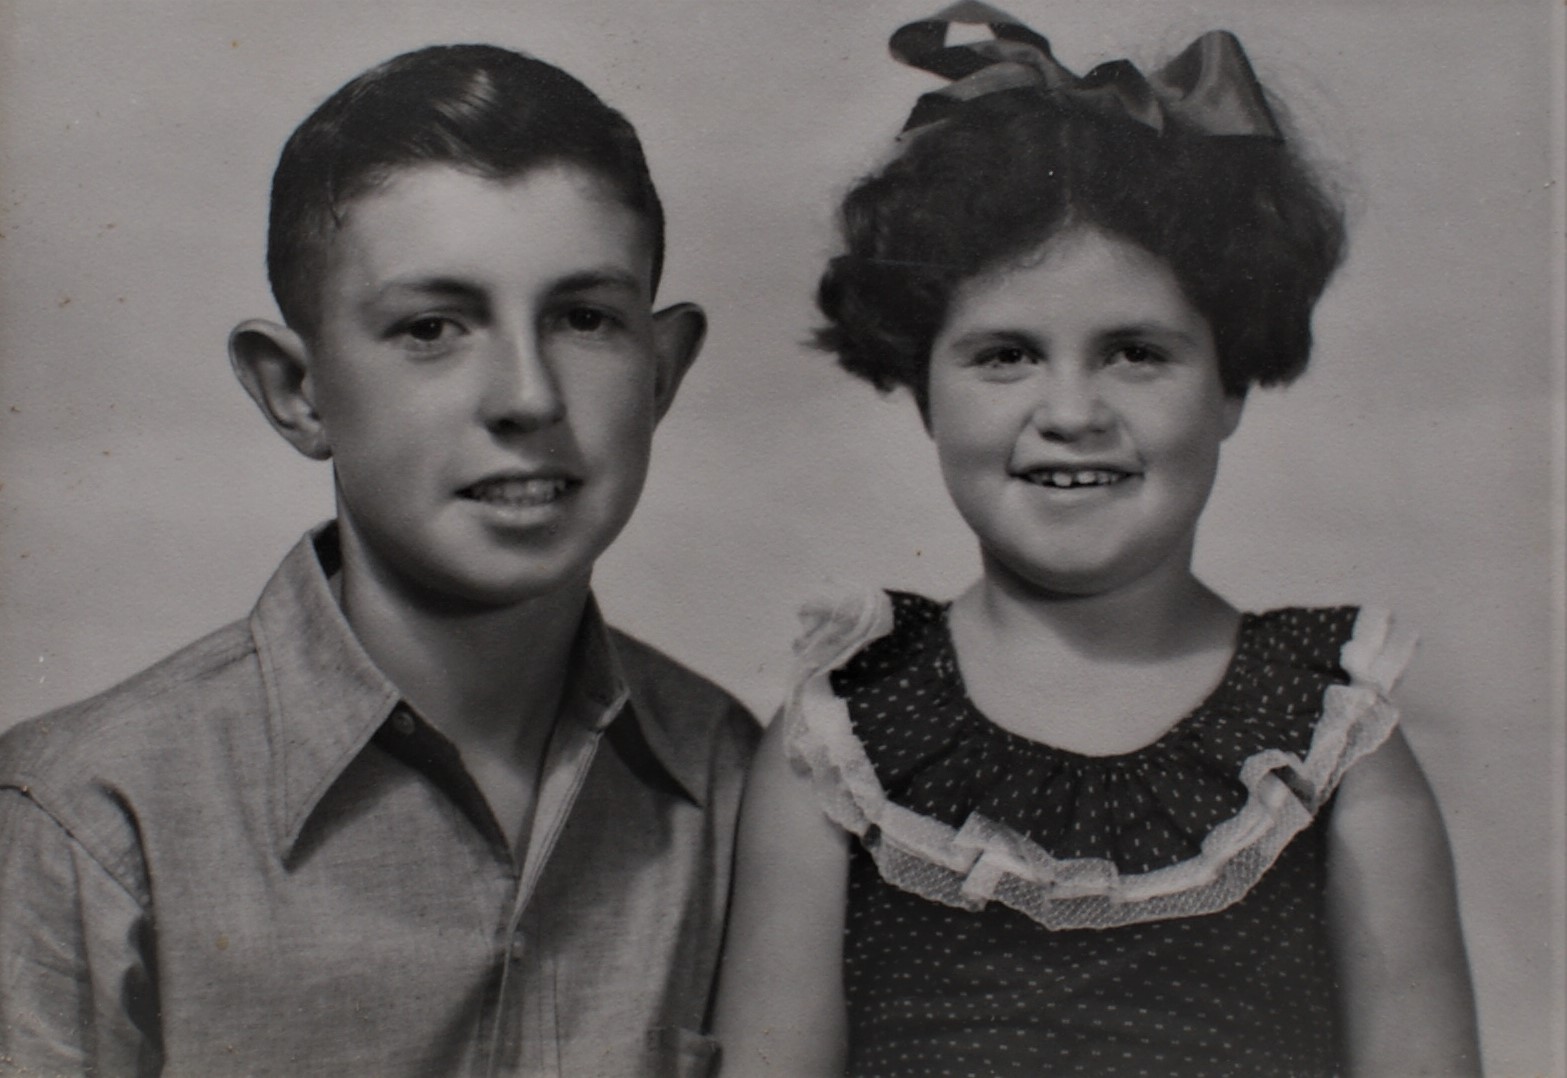 Studio shot of Lesley and her brother Ross. Both are looking straight at the cameraLesley wears a lack sleeveless dress with a frilled neckline and a bow in her hair